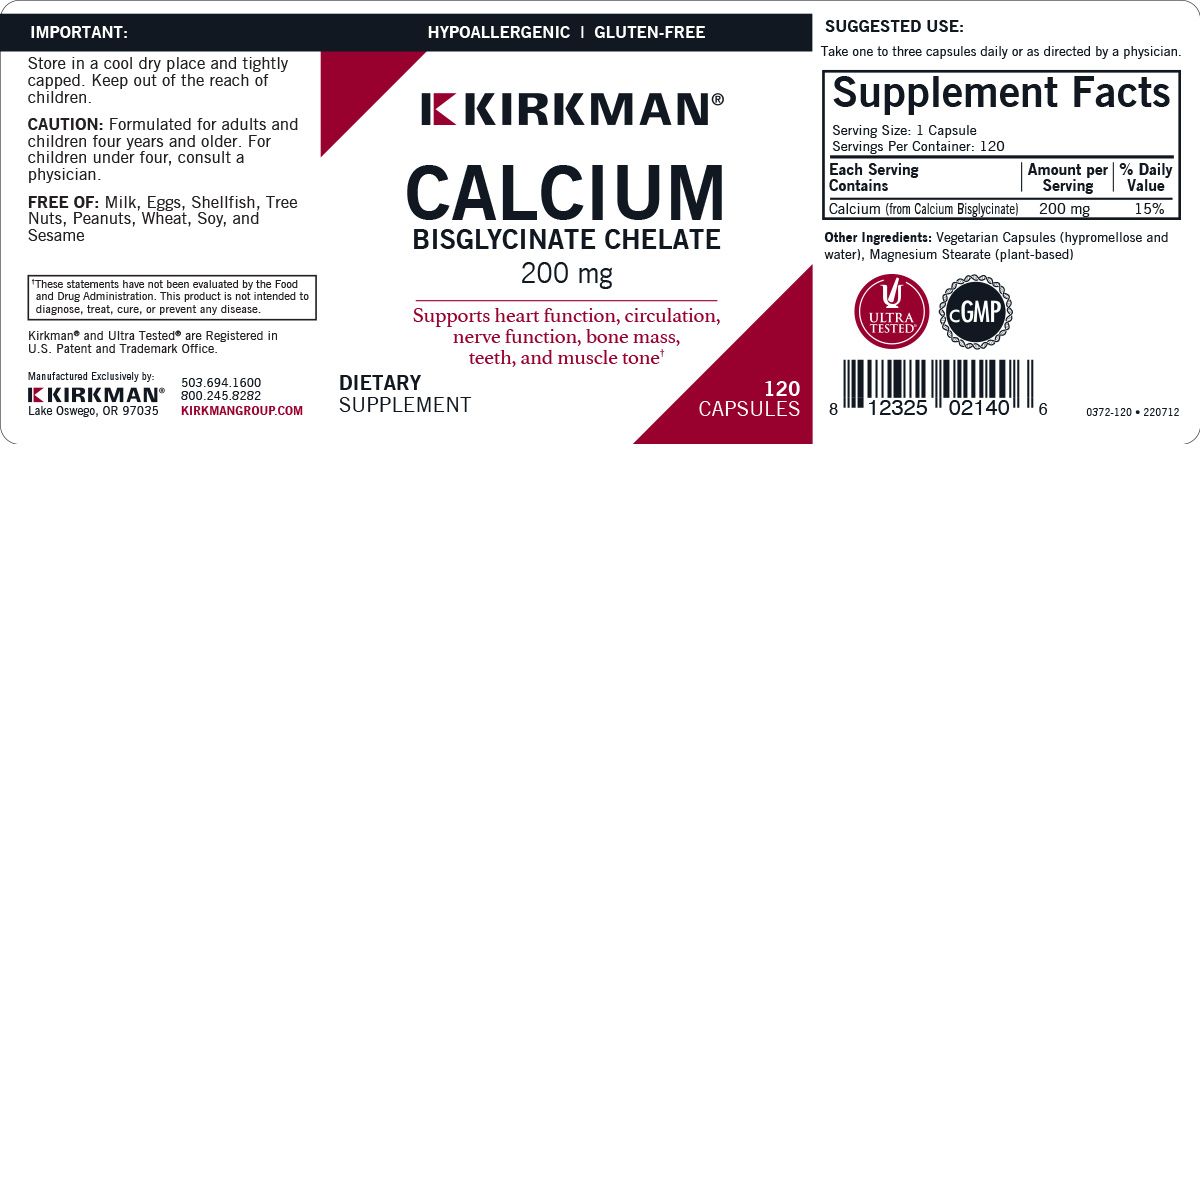 Calcium Bisglycinate Chelate 200 mg (without Vitamin D-3) - Hypoallergenic